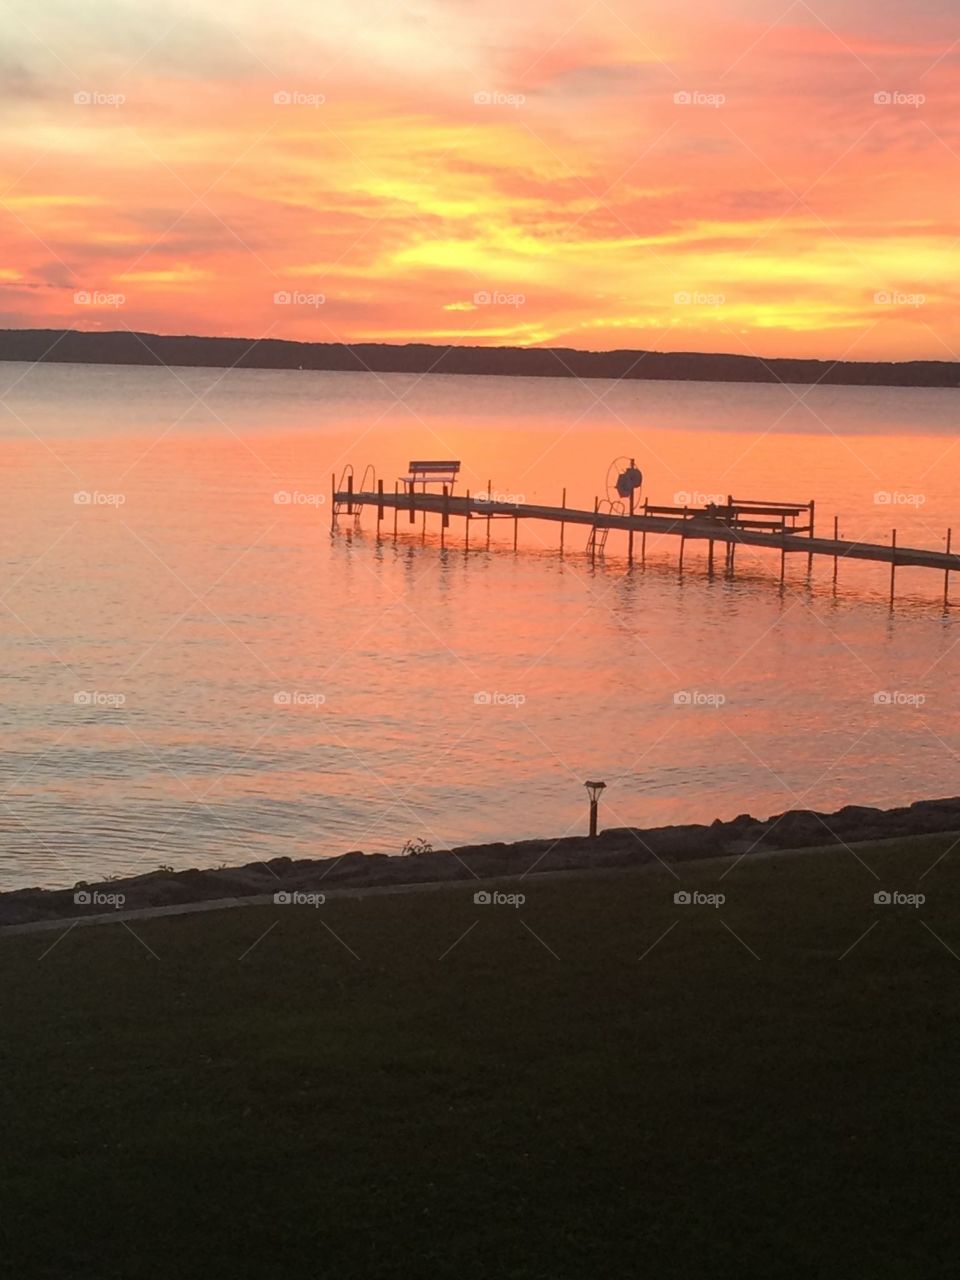 Nothing like a beautiful sunset over looking the lake!